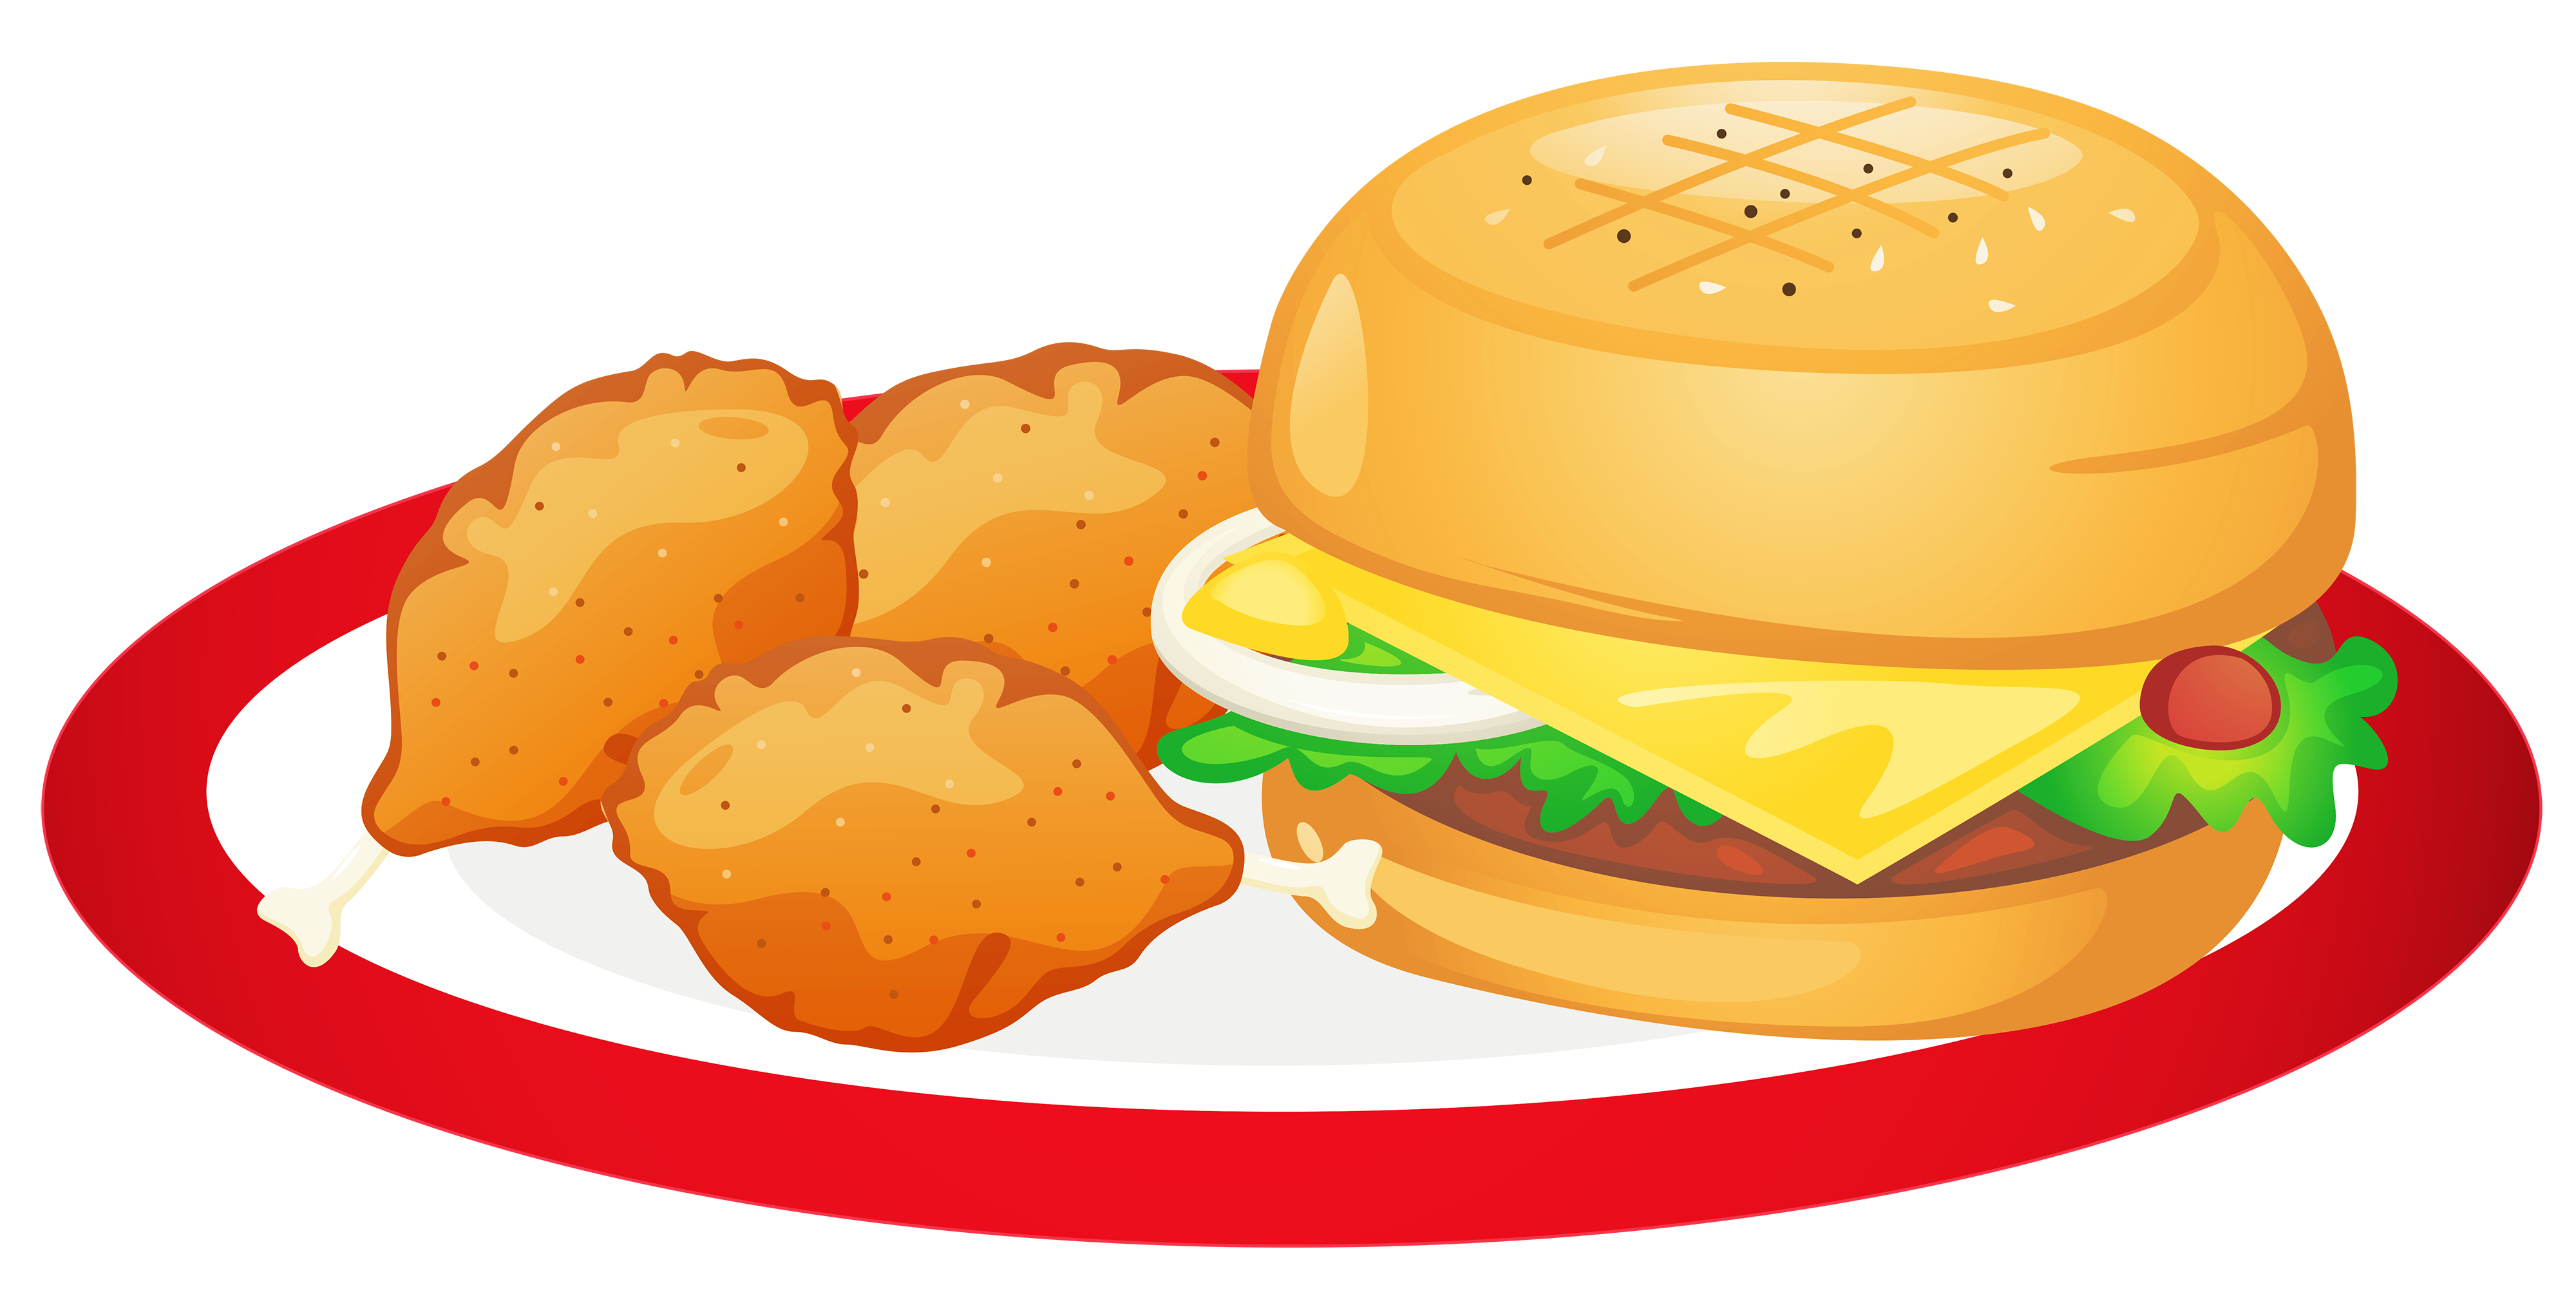 Plate of food clipart - ClipartFest